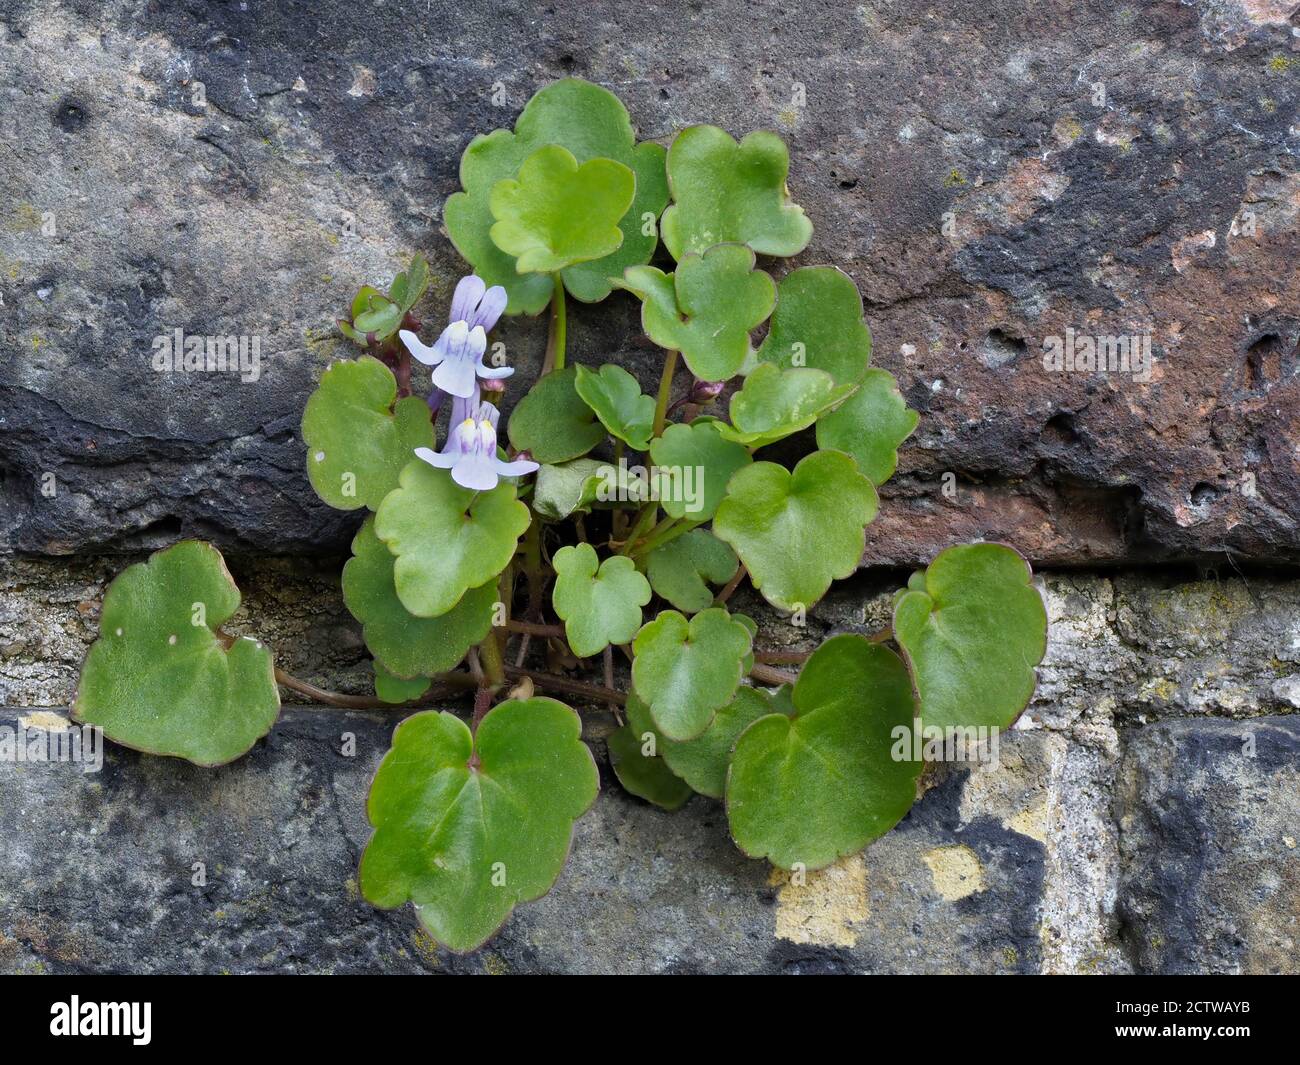 Ivy-leaved toadflax (Cymbalaria muralis) growing in stone wall, Kent UK, Stacked Focus Image Stock Photo